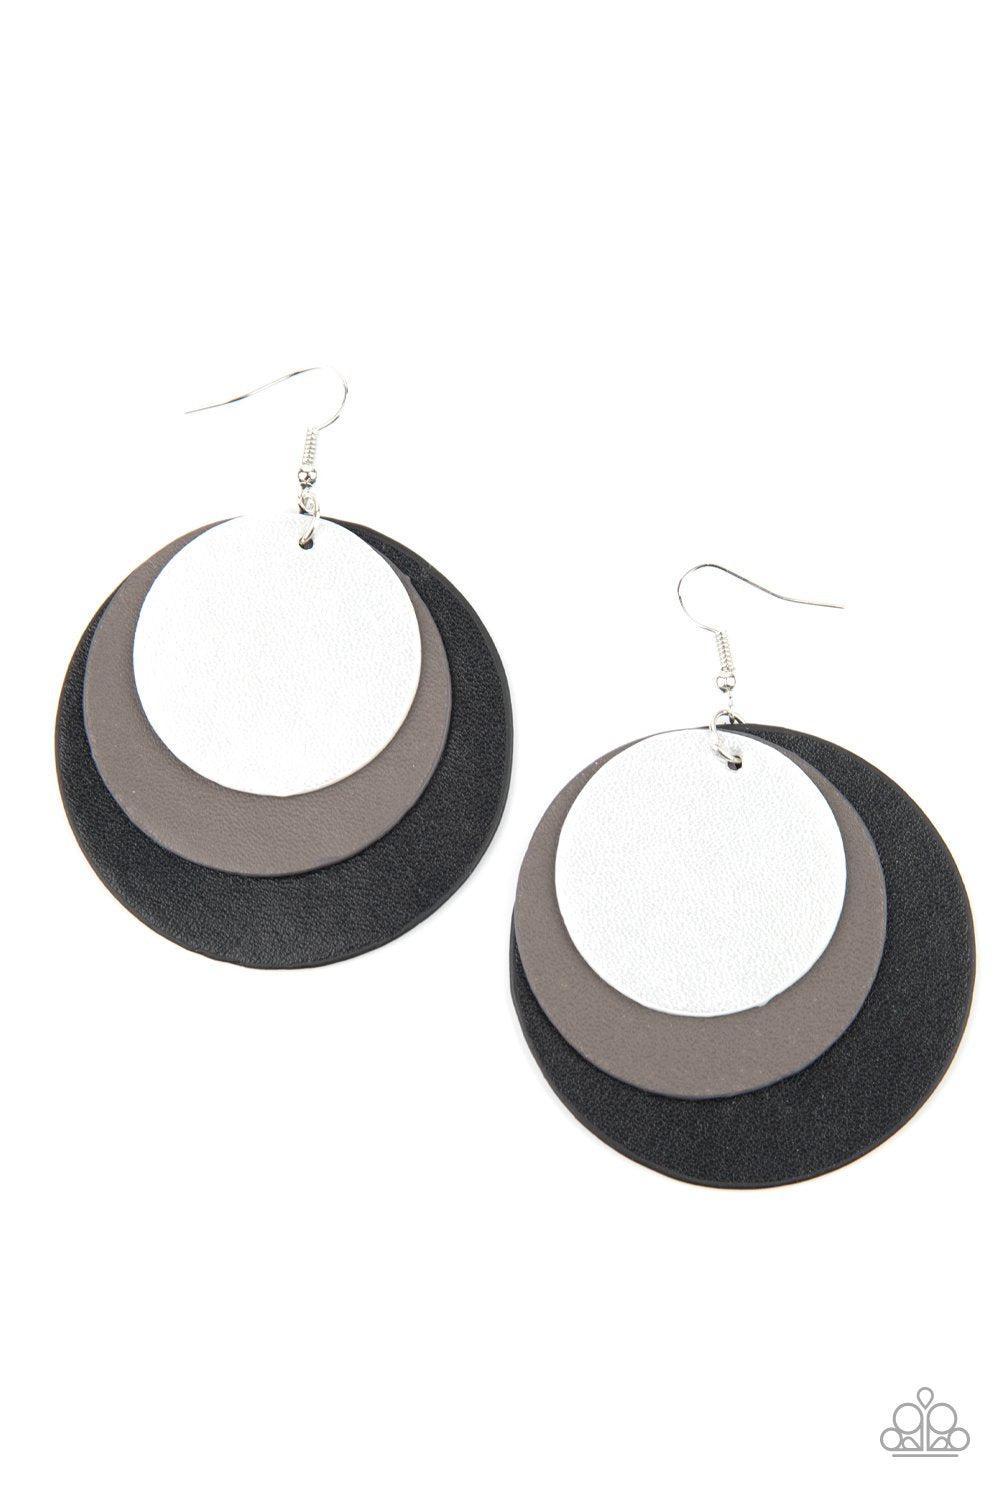 LEATHER Forecast Black Leather Earrings - Paparazzi Accessories-CarasShop.com - $5 Jewelry by Cara Jewels